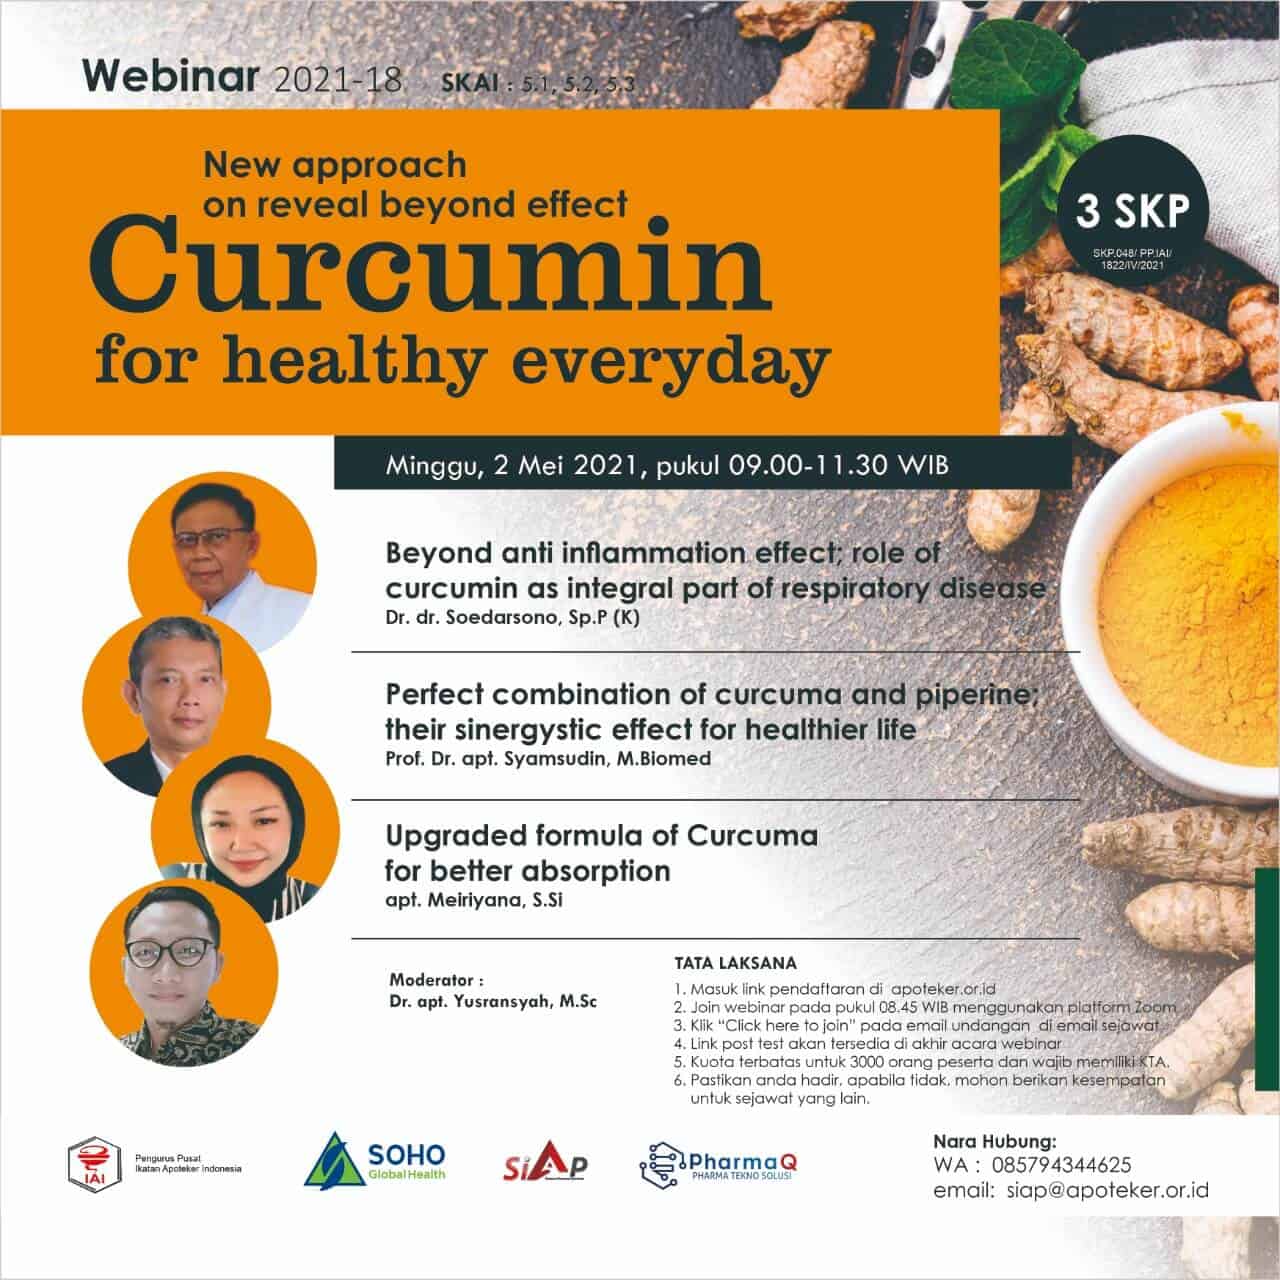 Webinar New approach on reveal beyond effect Curcumin for healthy everyday